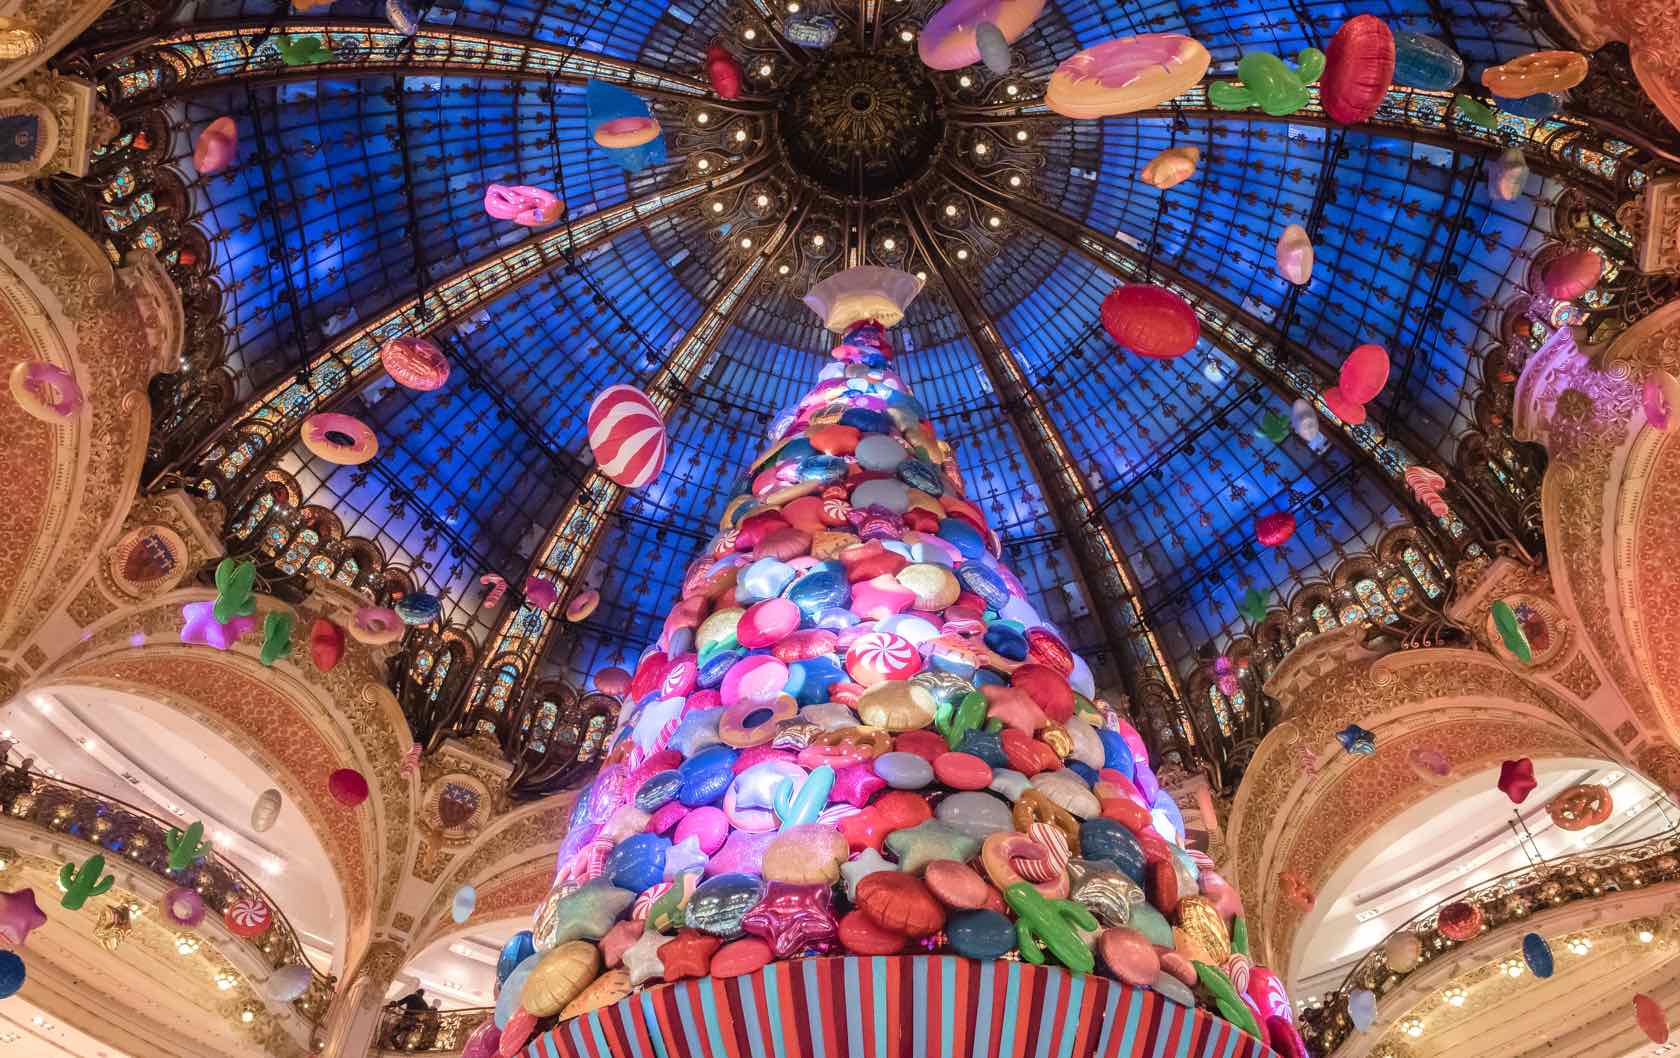 Galeries Lafayette Paris Haussmann - All You Need to Know BEFORE You Go  (with Photos)